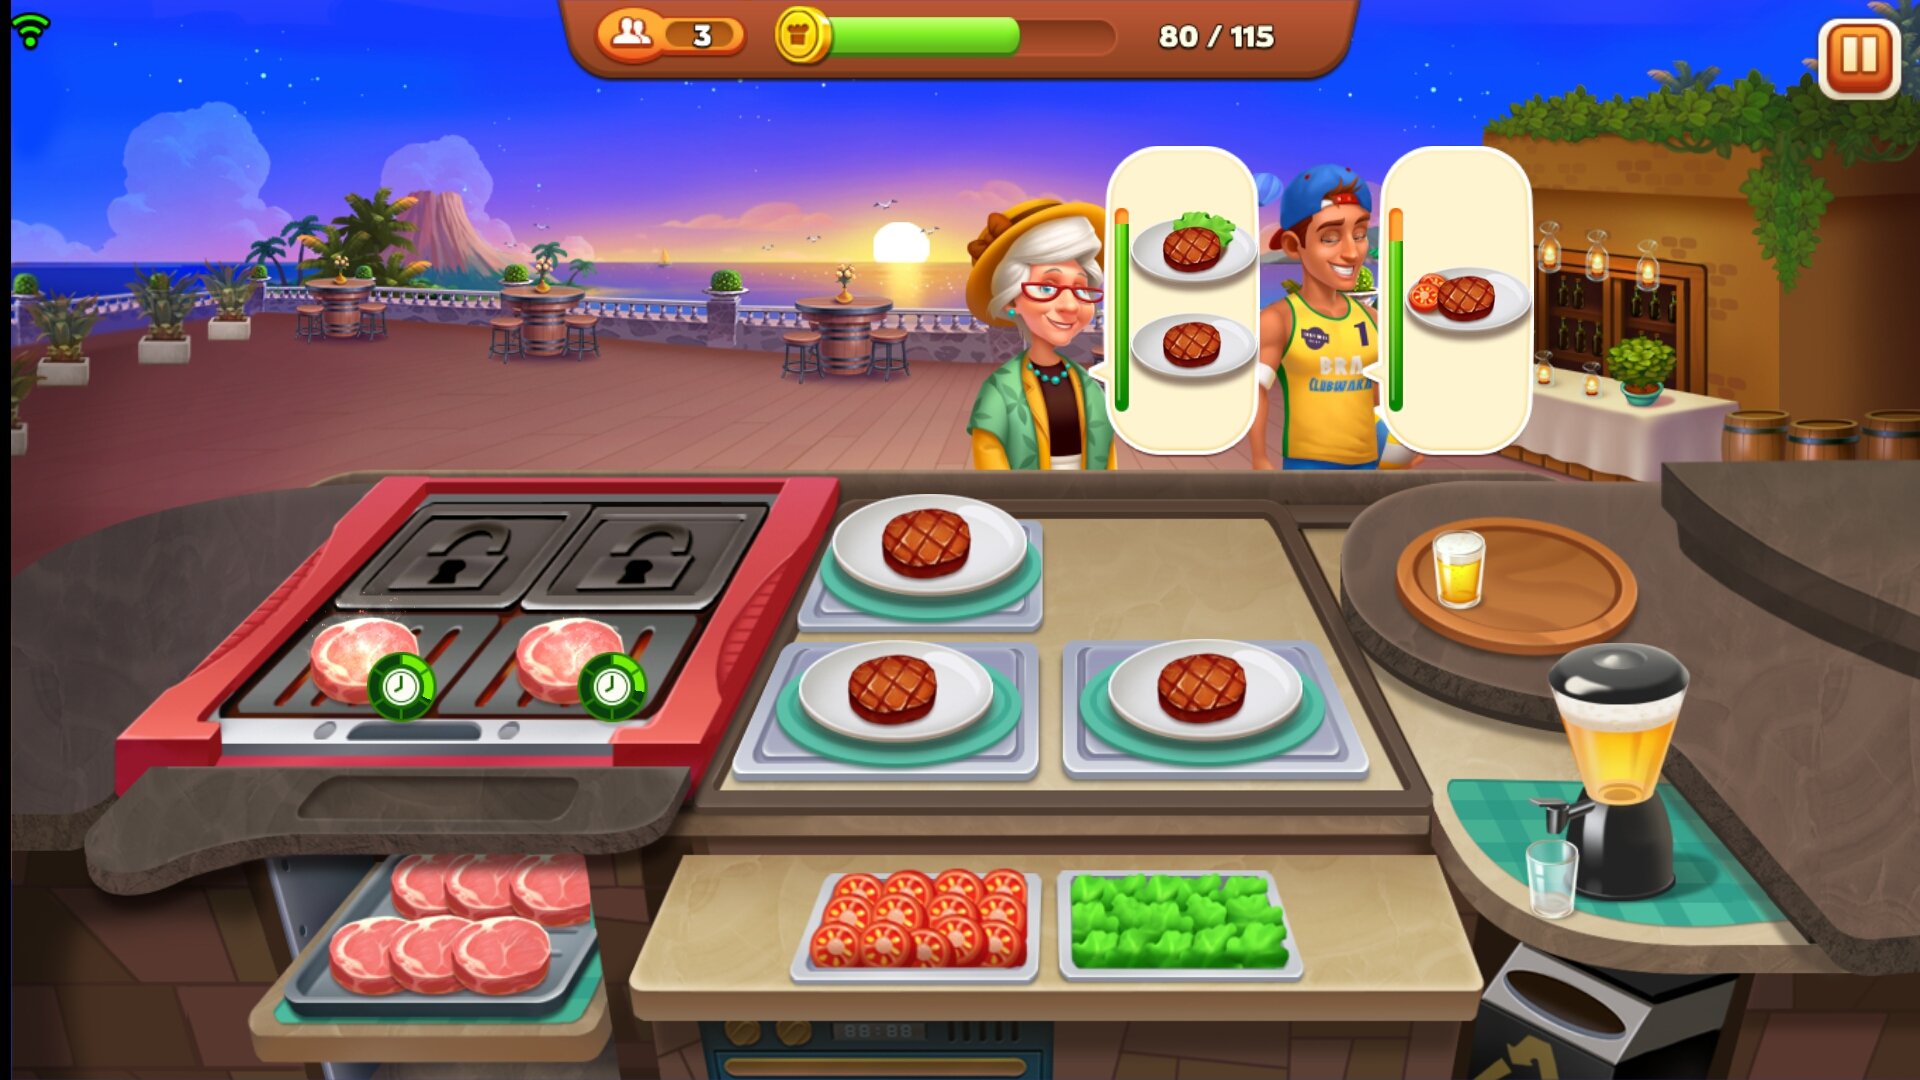 Cooking Live: Restaurant game free instals